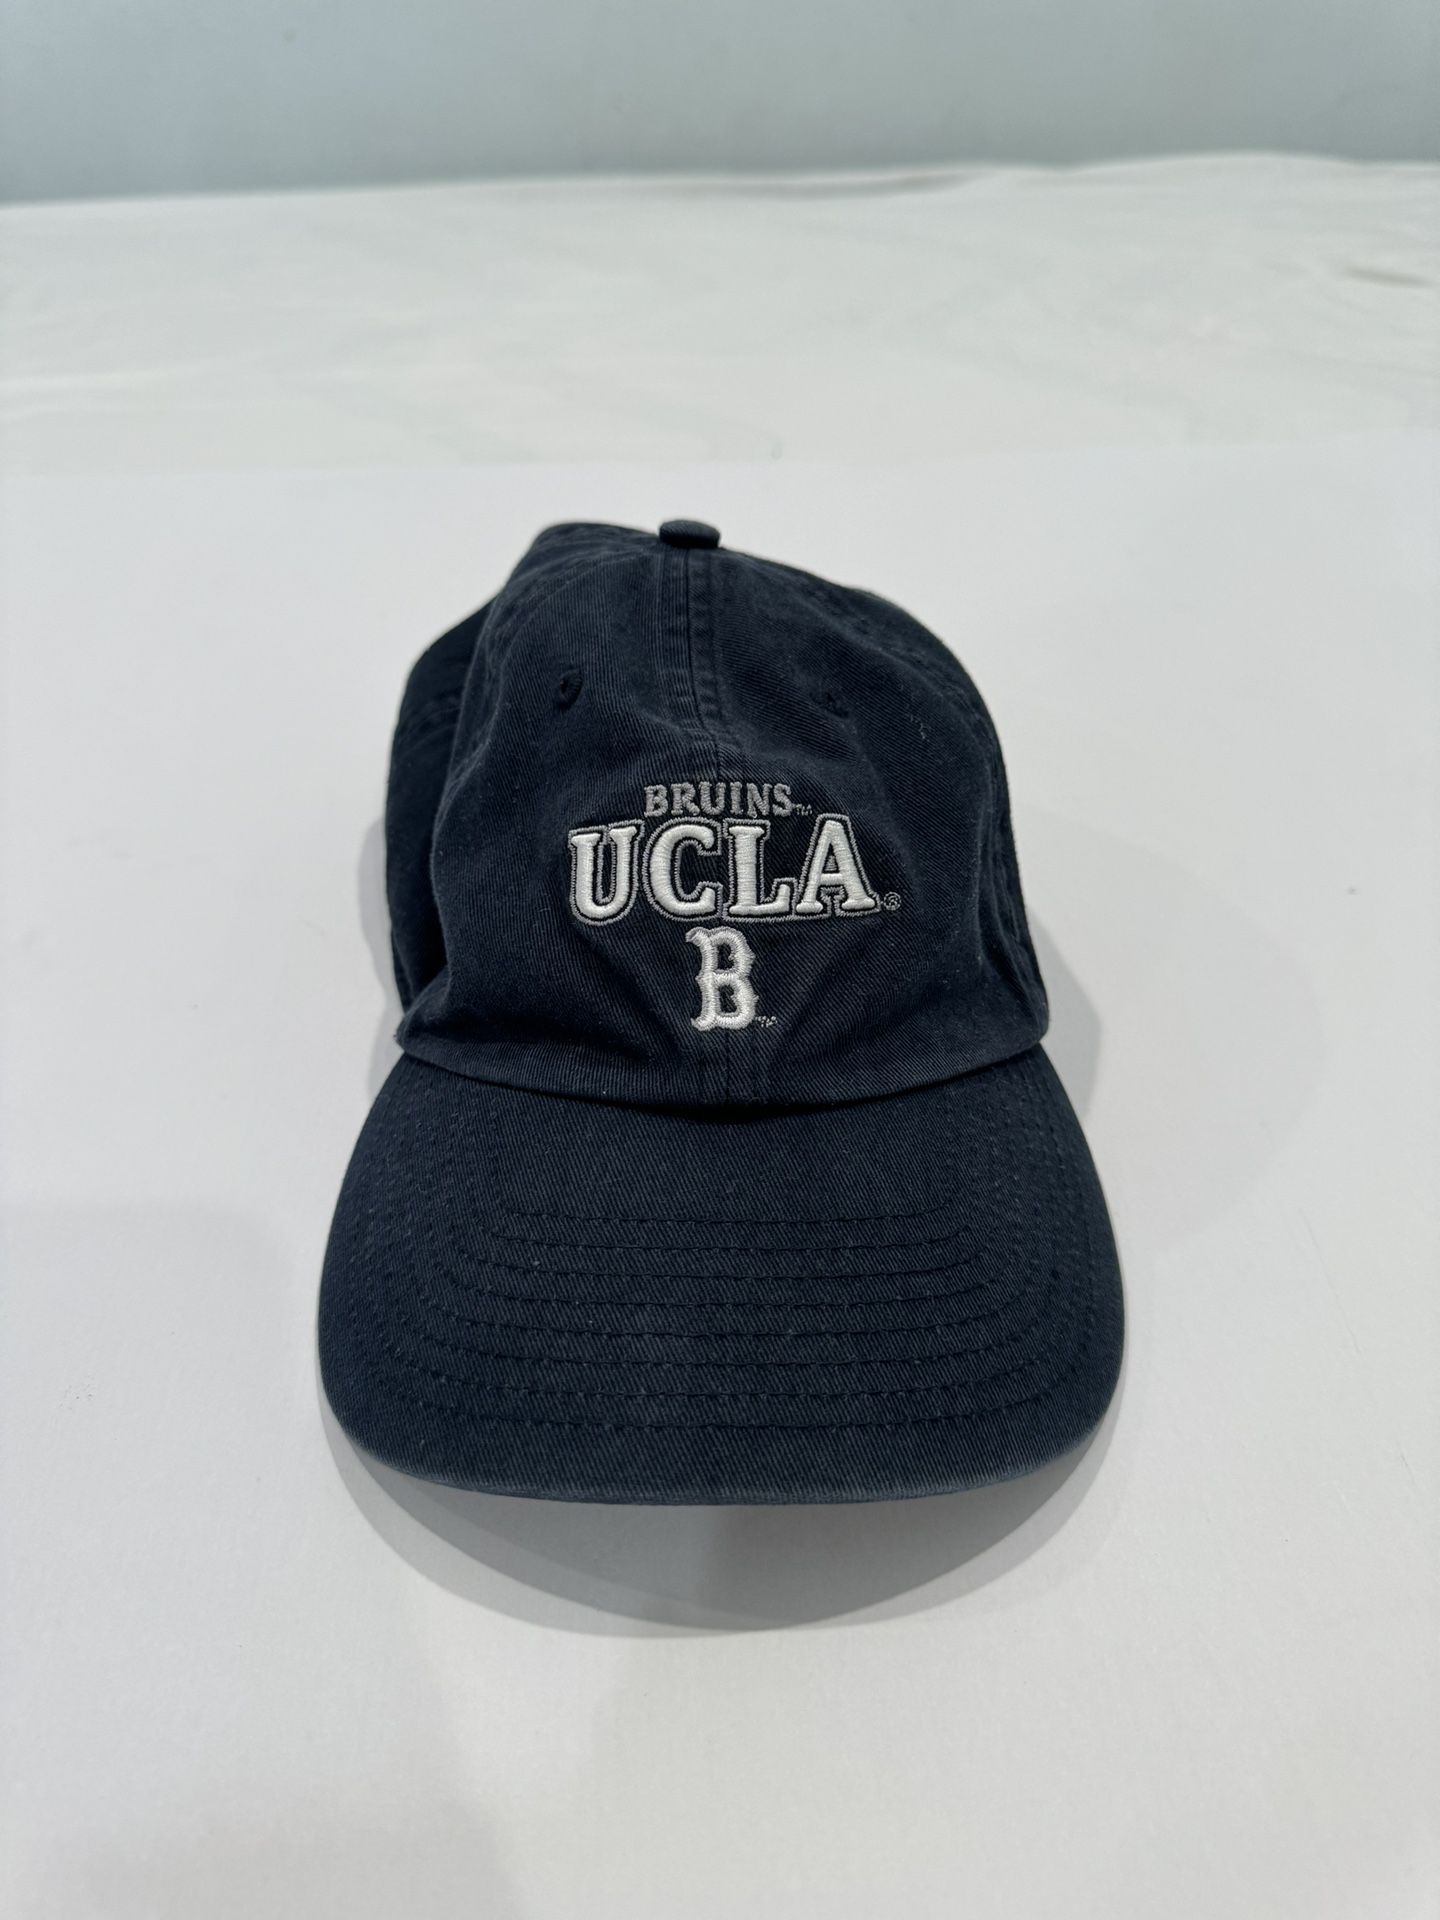 Beautiful UCLA Hat Adjustable Navy Blue (One Size Fits All)